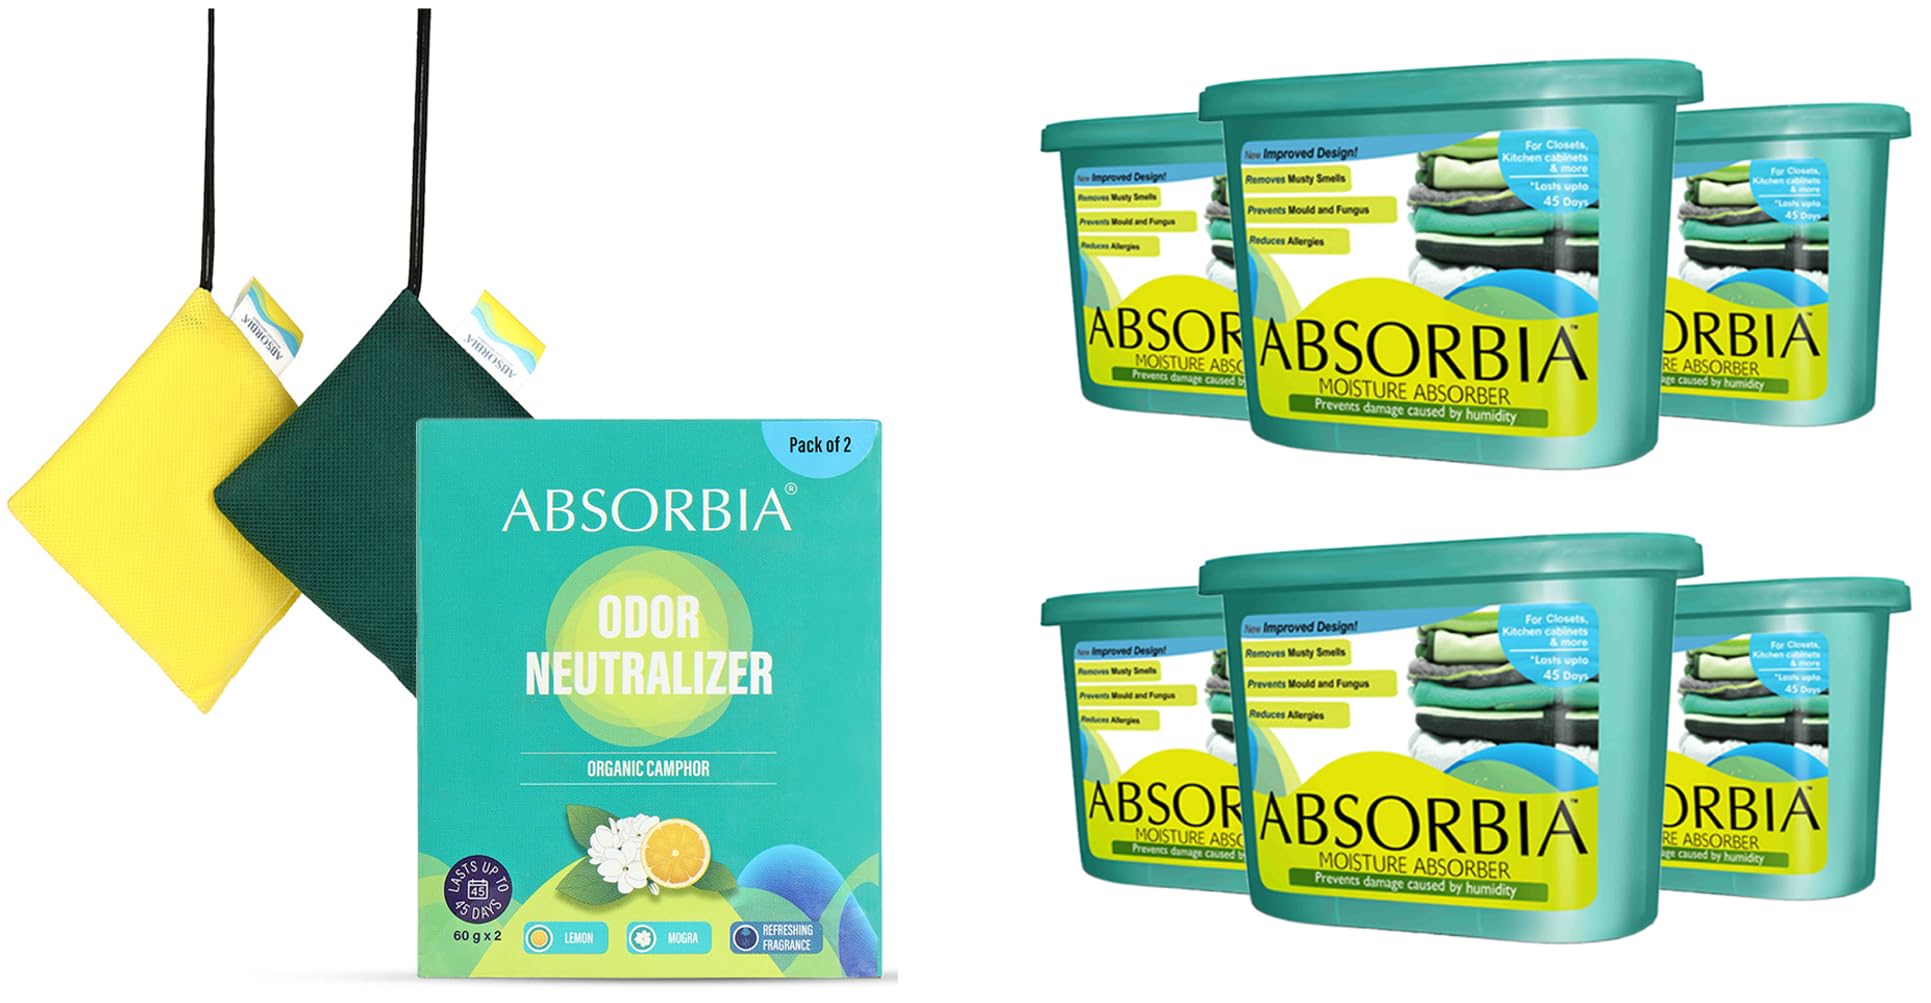 Absorbia Moisture Absorber | Absorbia Classic (300 gms X 6 boxes)- Season Pack of 6 | Absorption Capacity 600ml Each|Dehumidier for Wardrobe etc (Season Pack with Camphor)